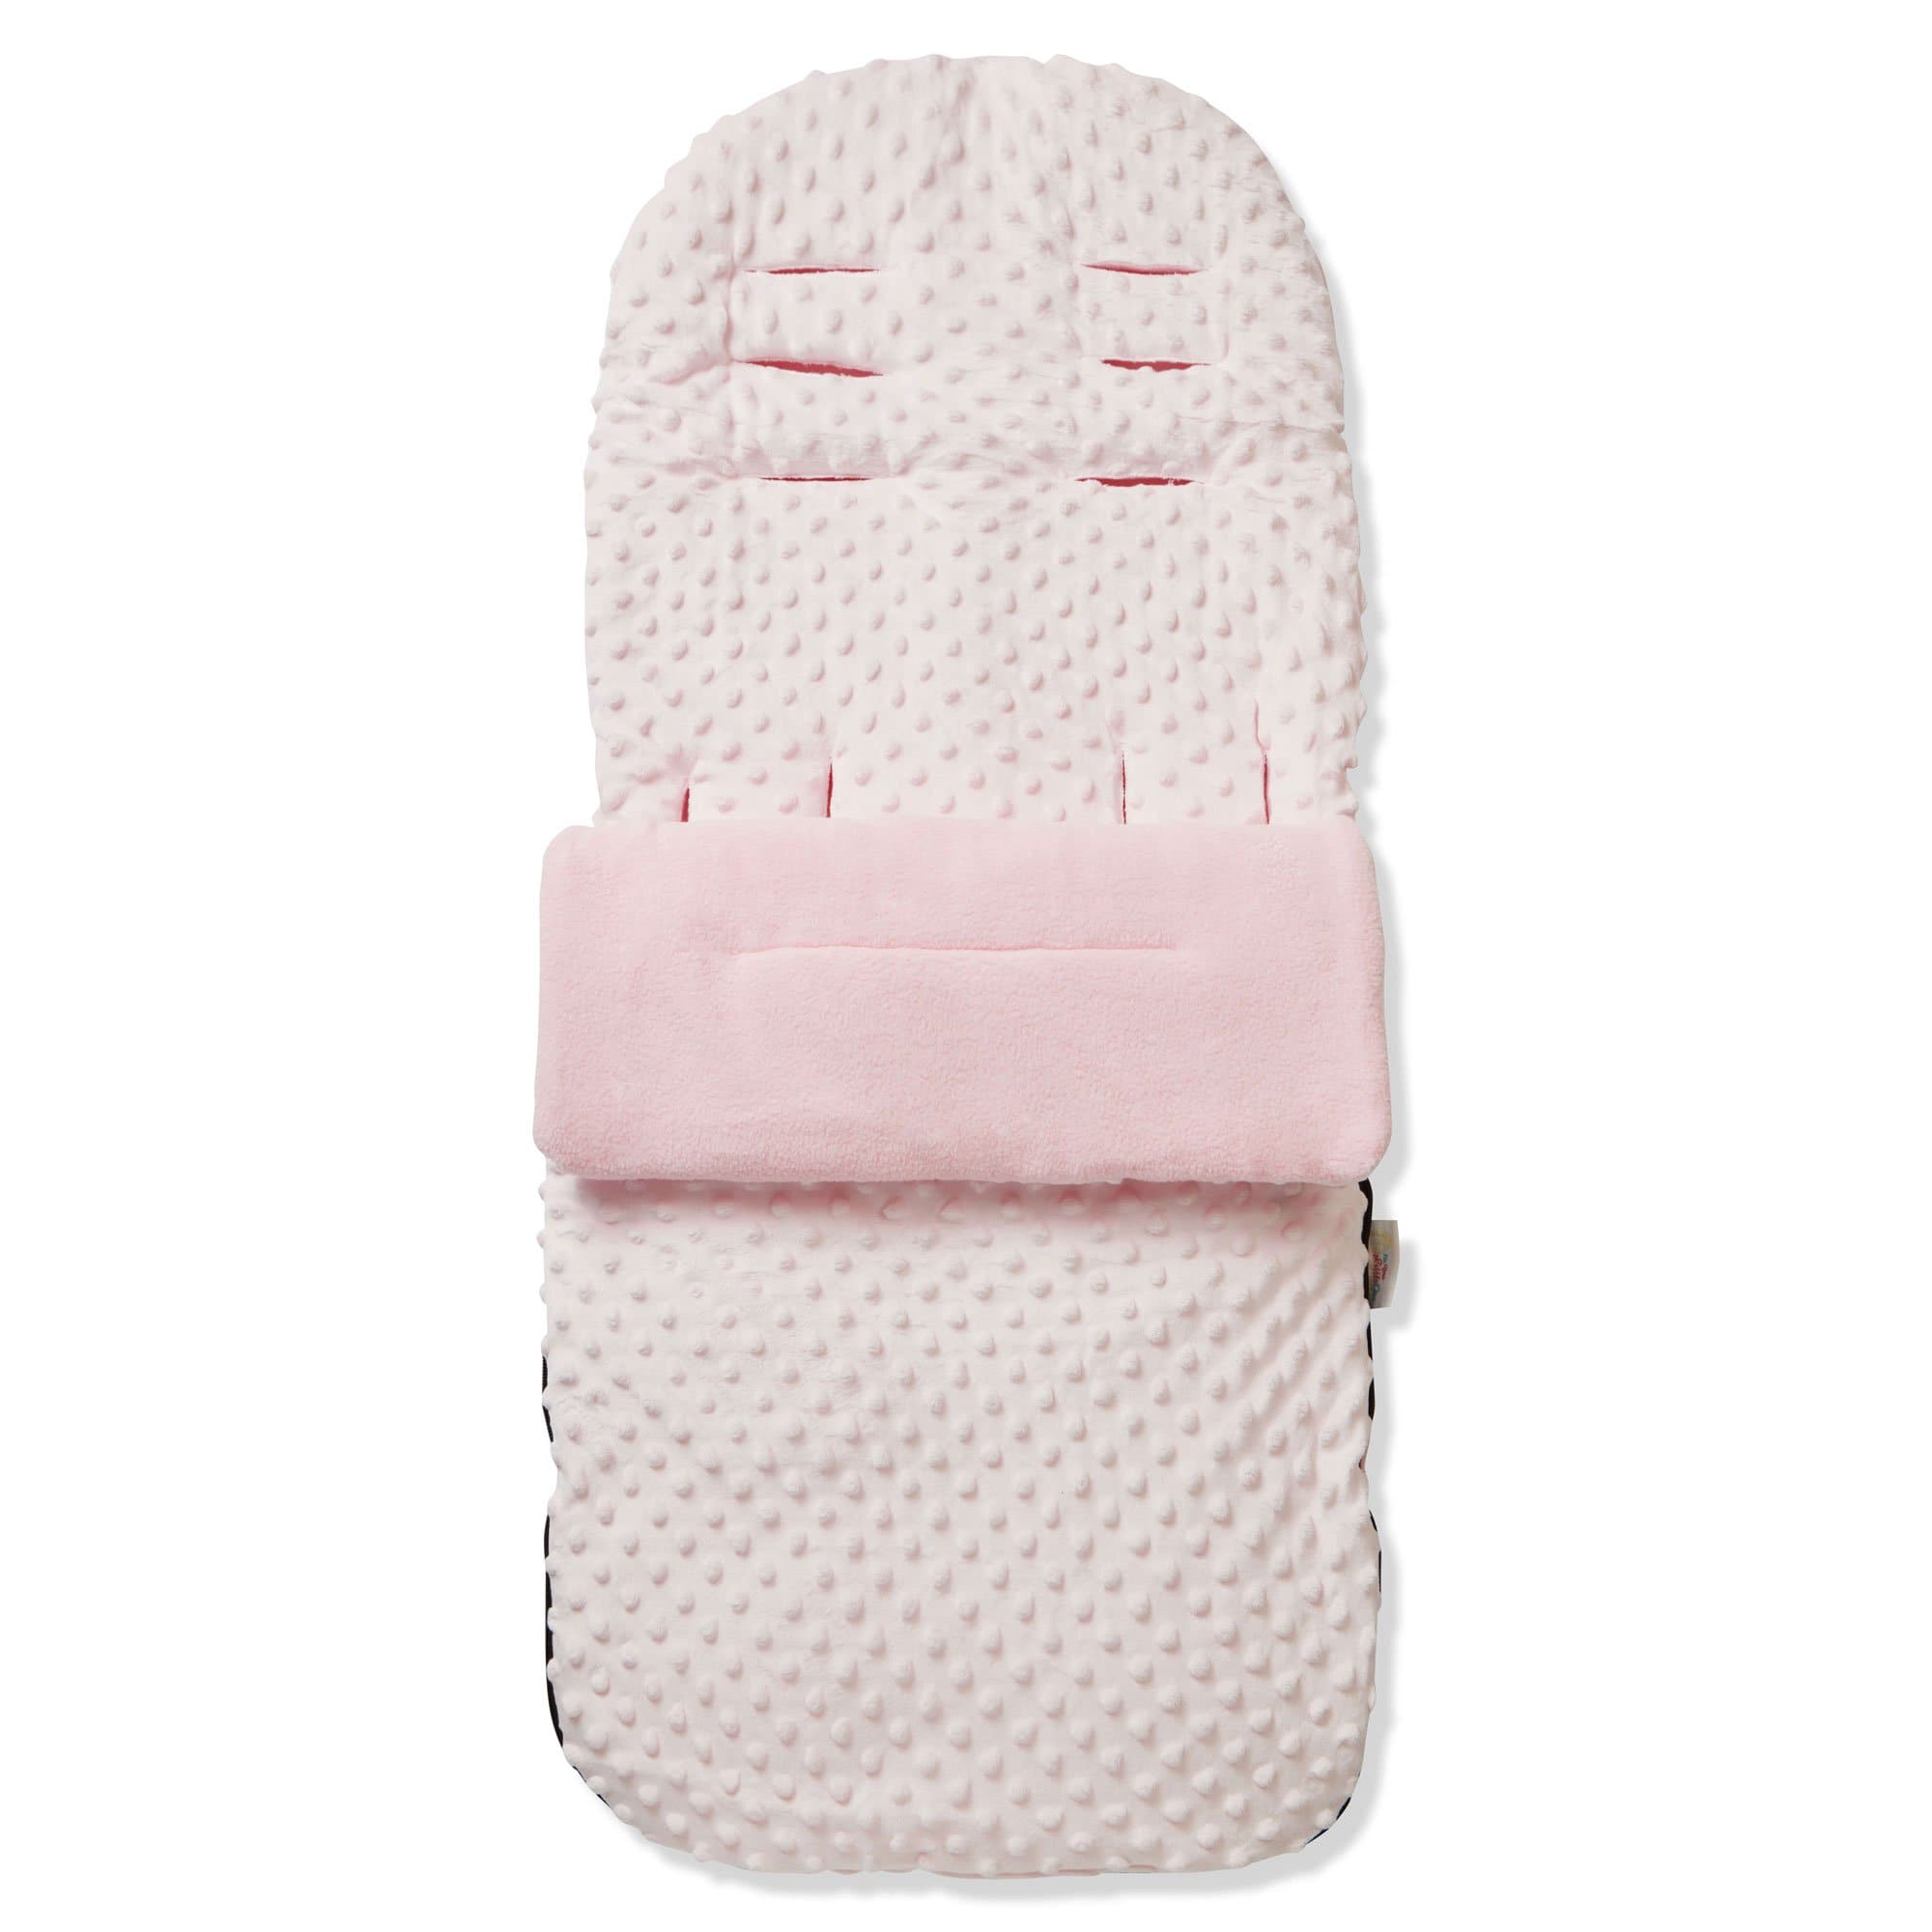 Dimple Footmuff / Cosy Toes Compatible with Teutonia - Pink / Fits All Models | For Your Little One